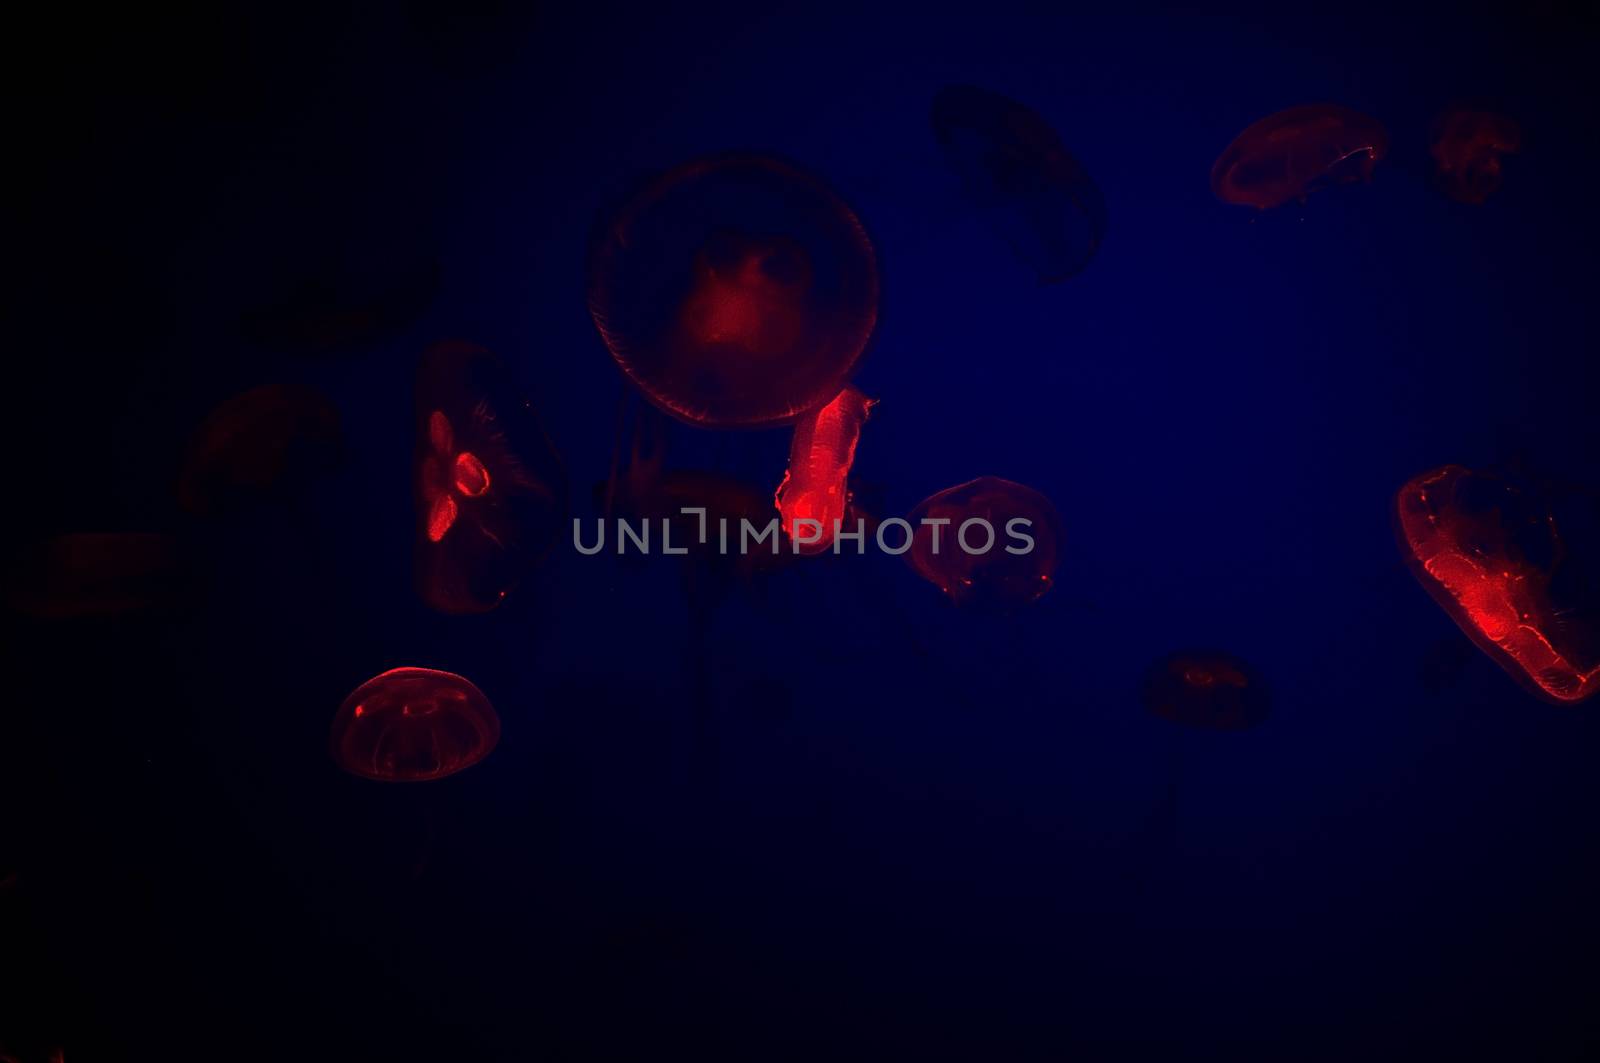 Jelly fish by thisisdraft